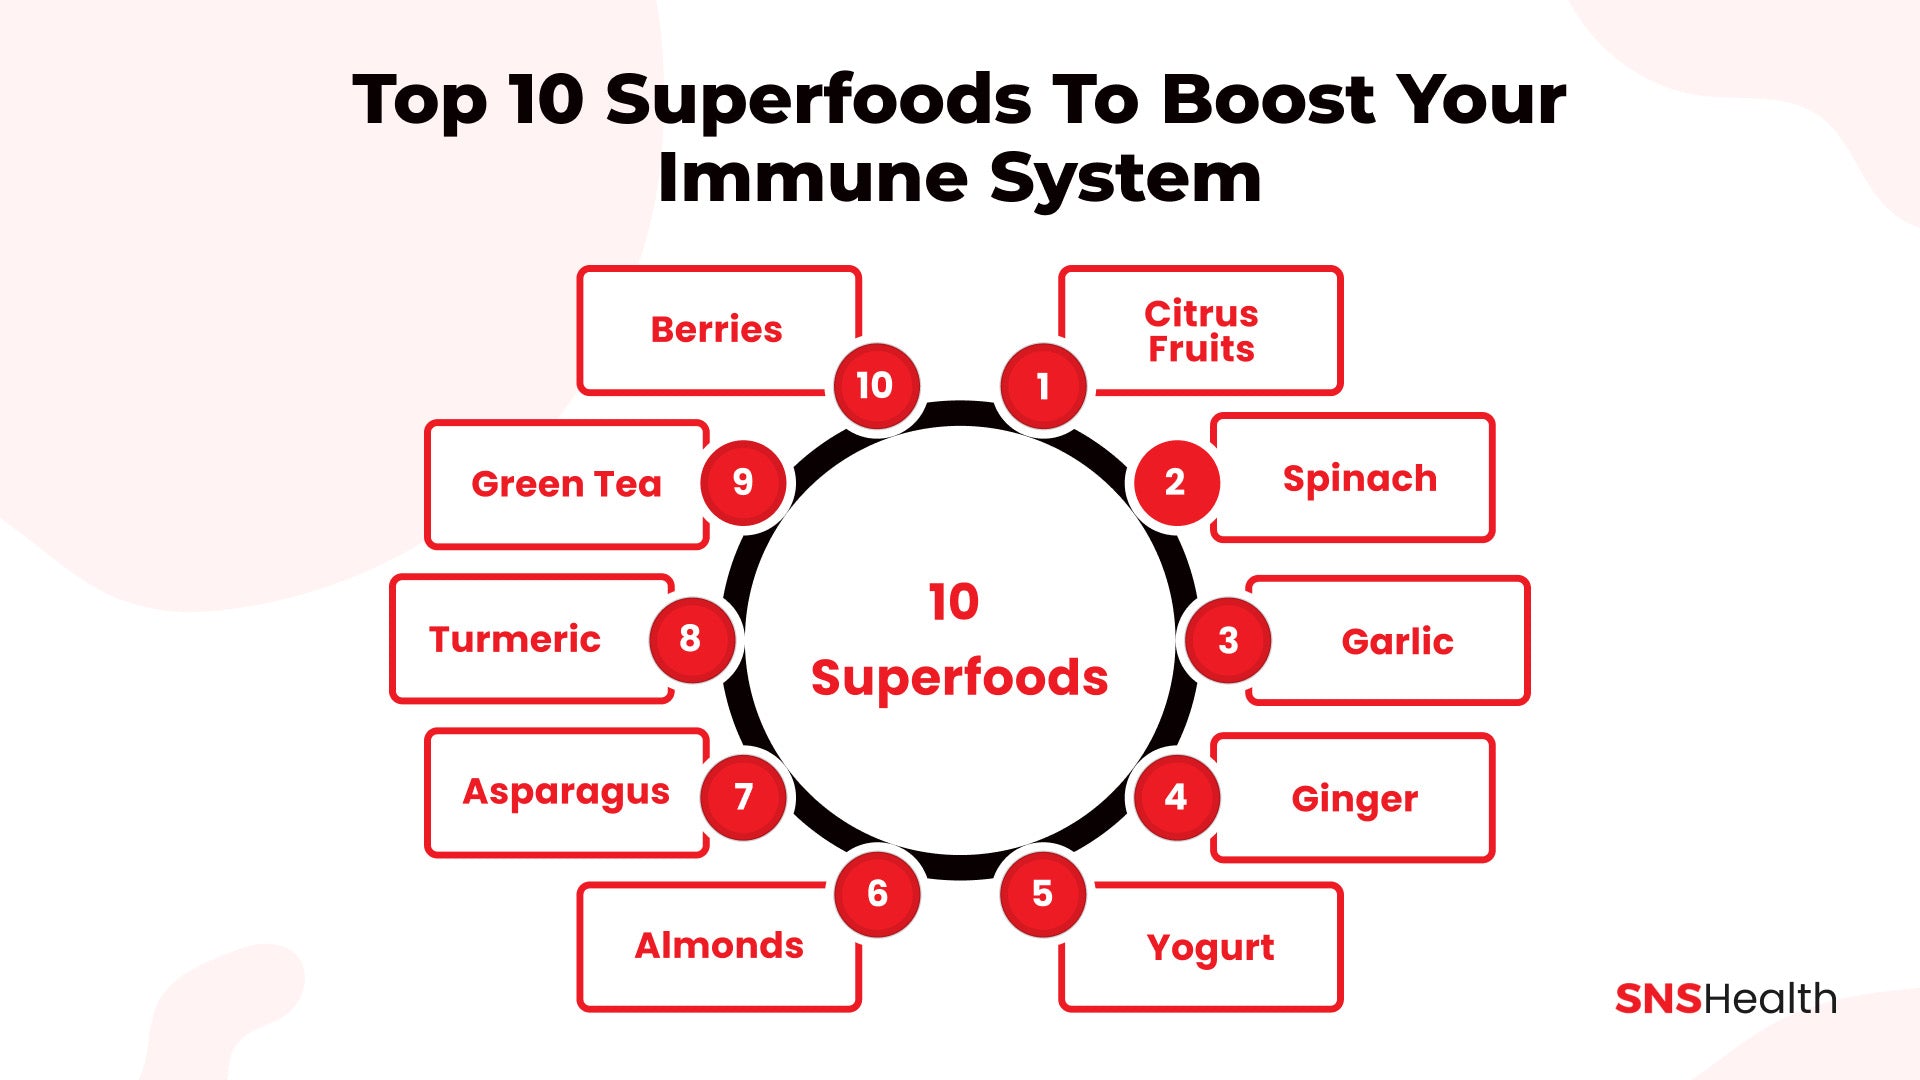 Top 10 Superfoods to Boost Your Immune System